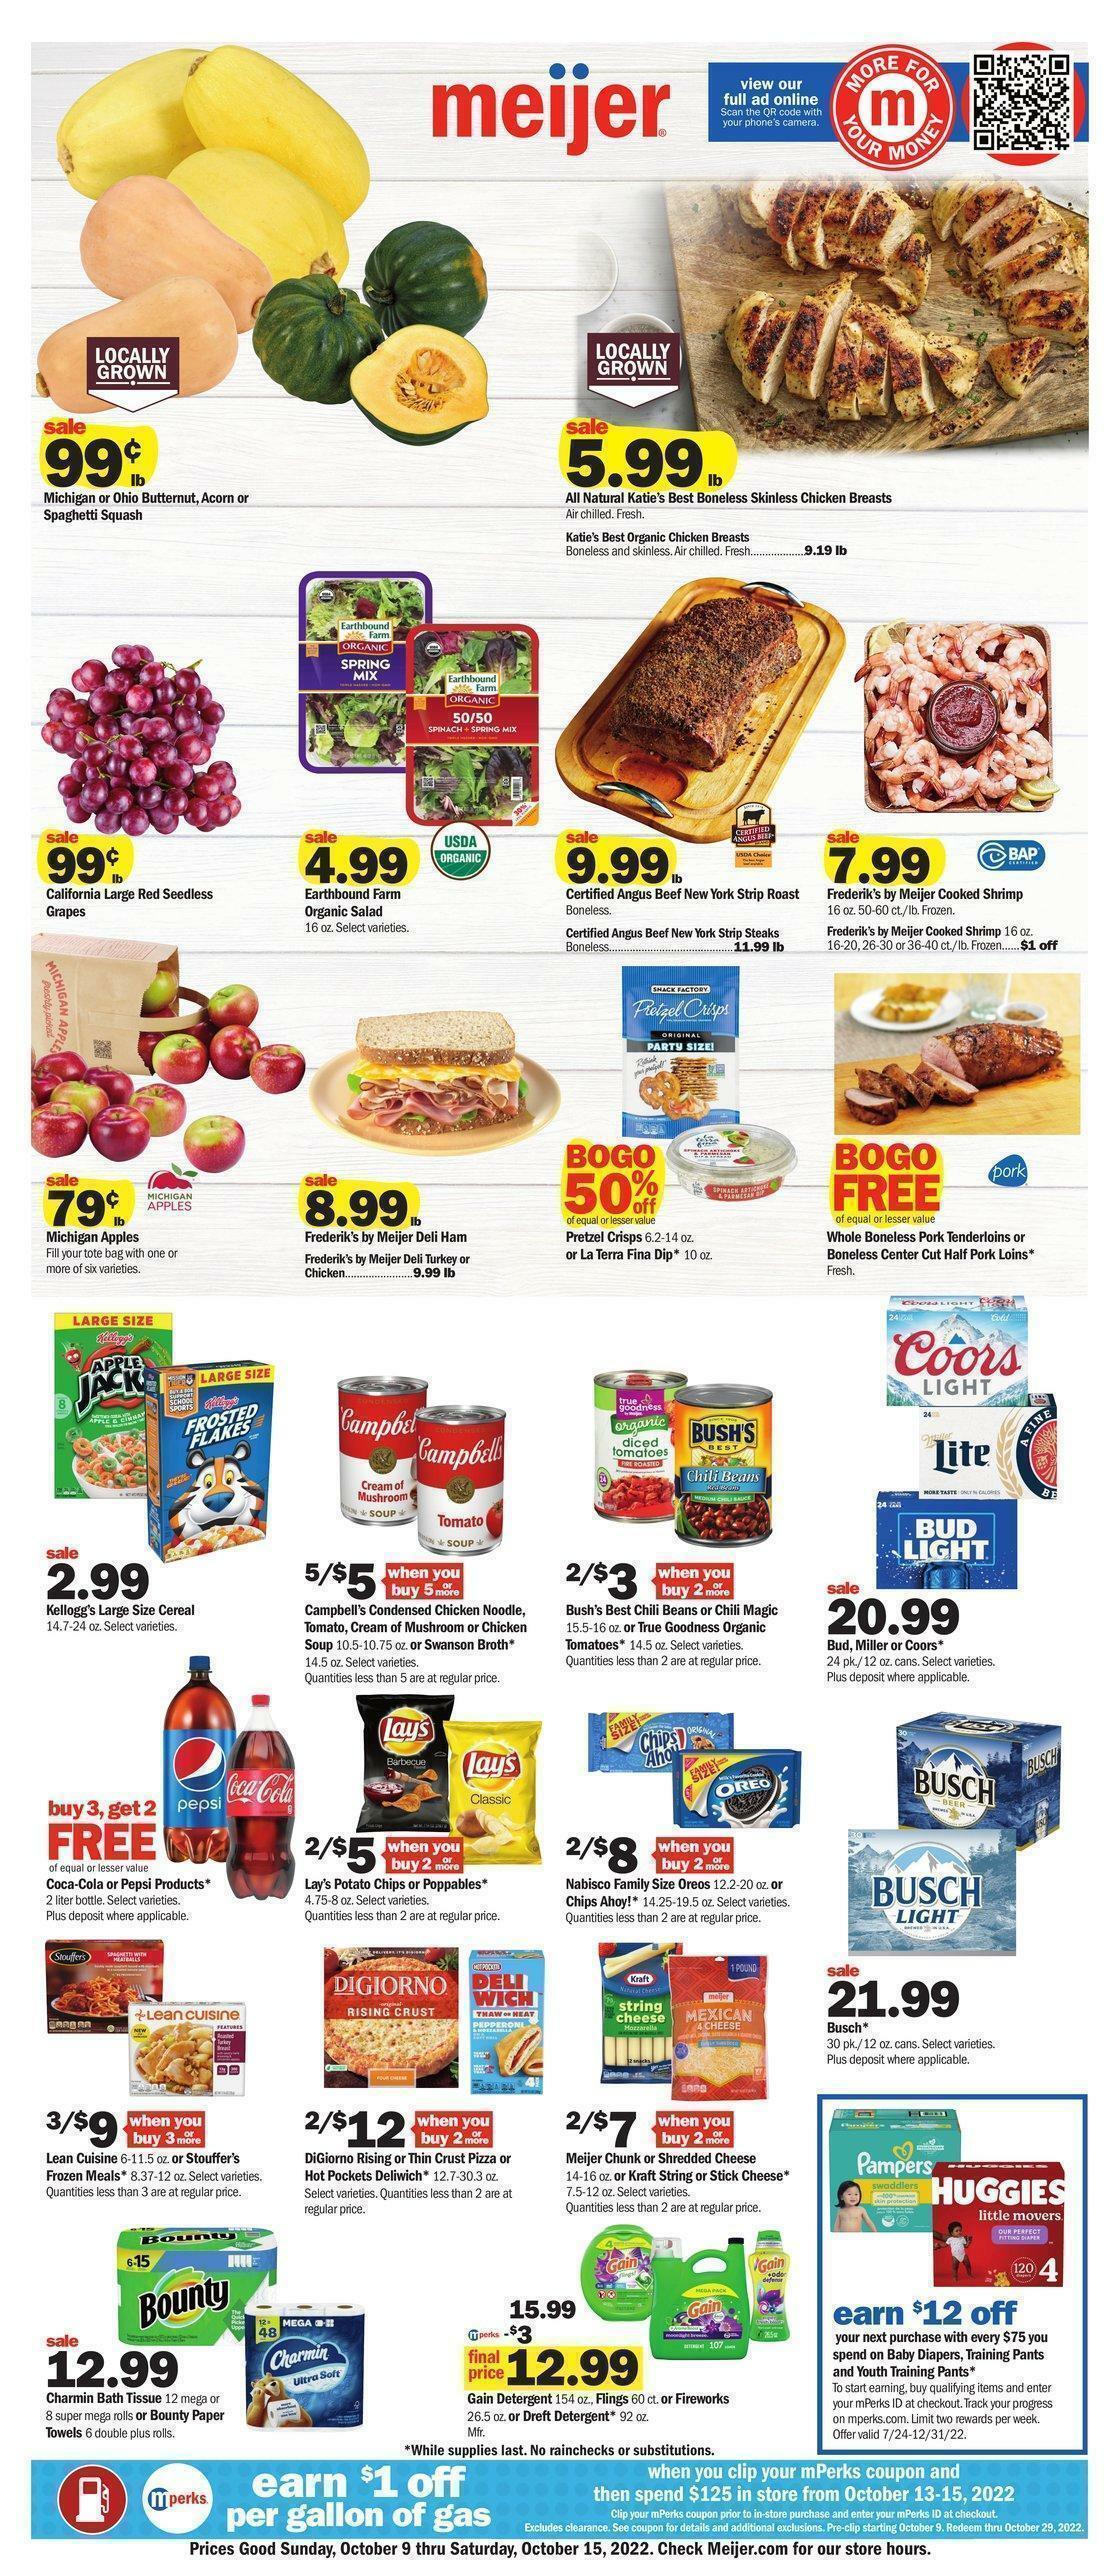 Meijer Weekly Ad from October 9